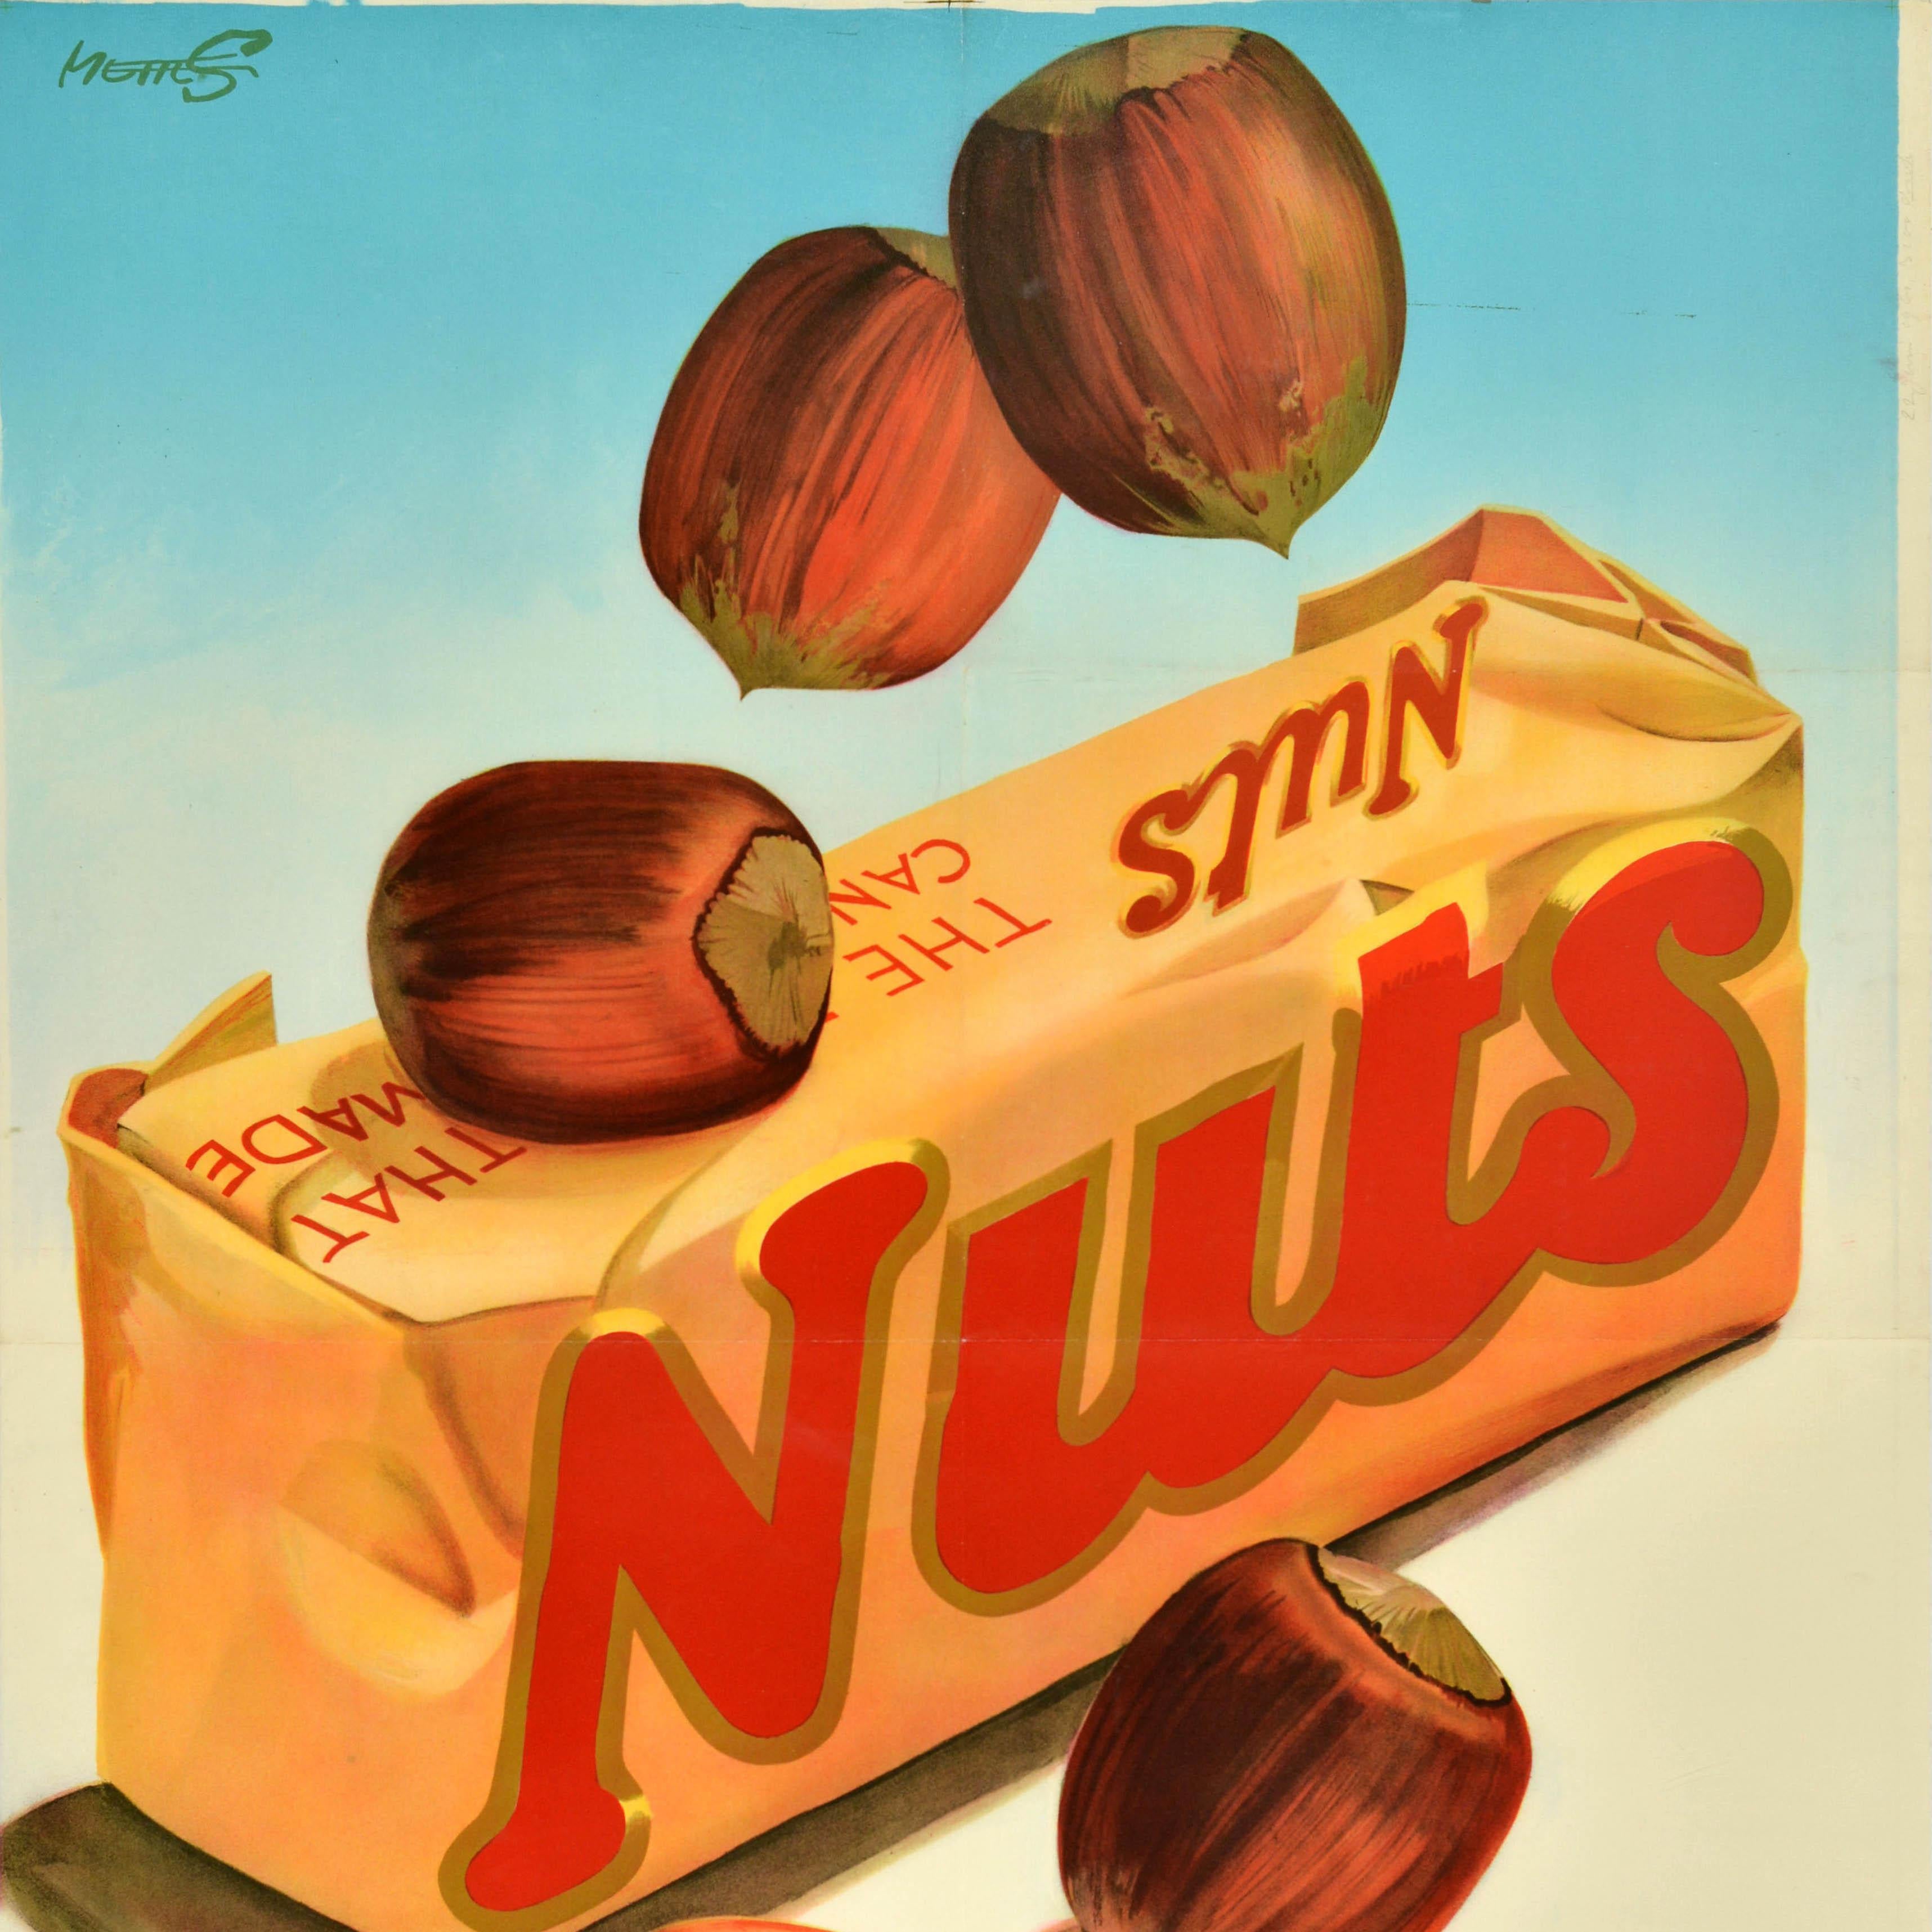 Dutch Original Vintage Food Advertising Poster Nuts Chocolate Bar Delicious Product For Sale